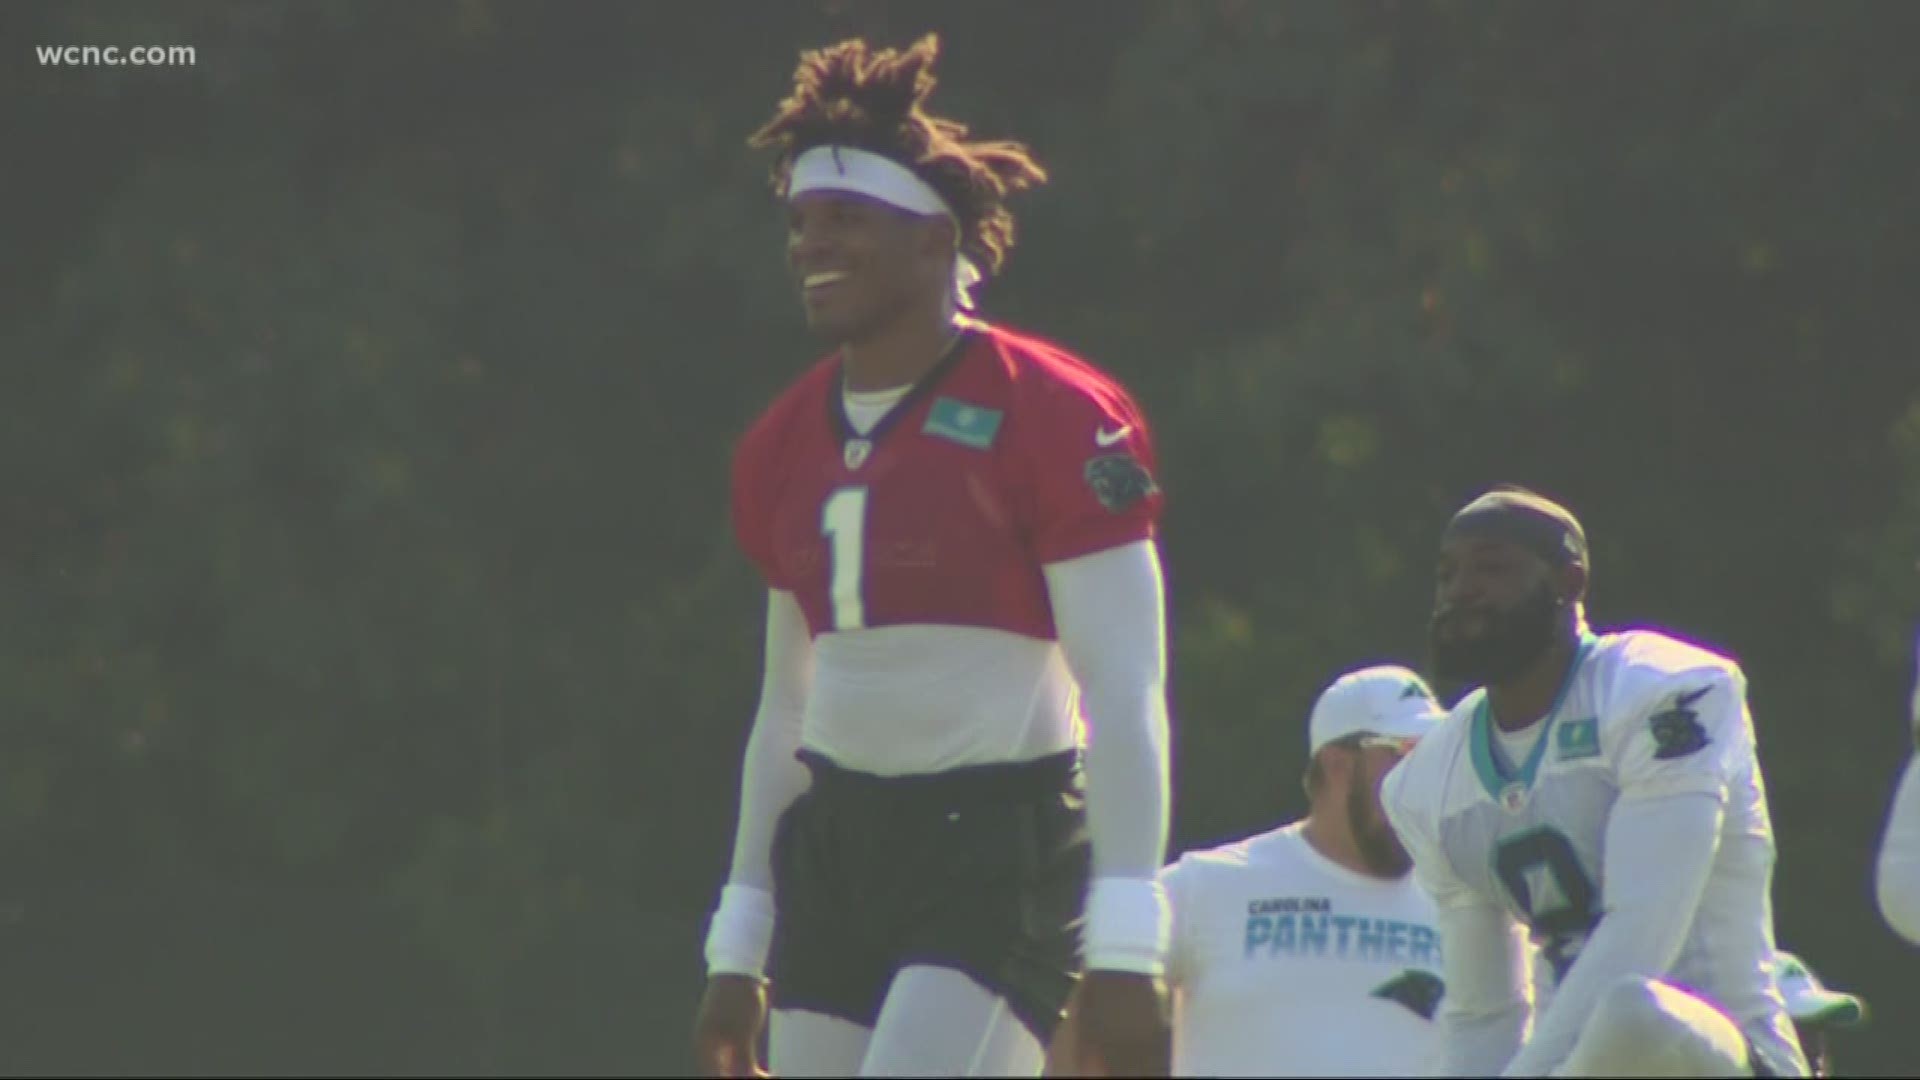 The Panthers play their first of four pre-season games on Thursday night, but not everyone will be on the field. Exercising caution, the team is withholding two star players from the starting lineup.